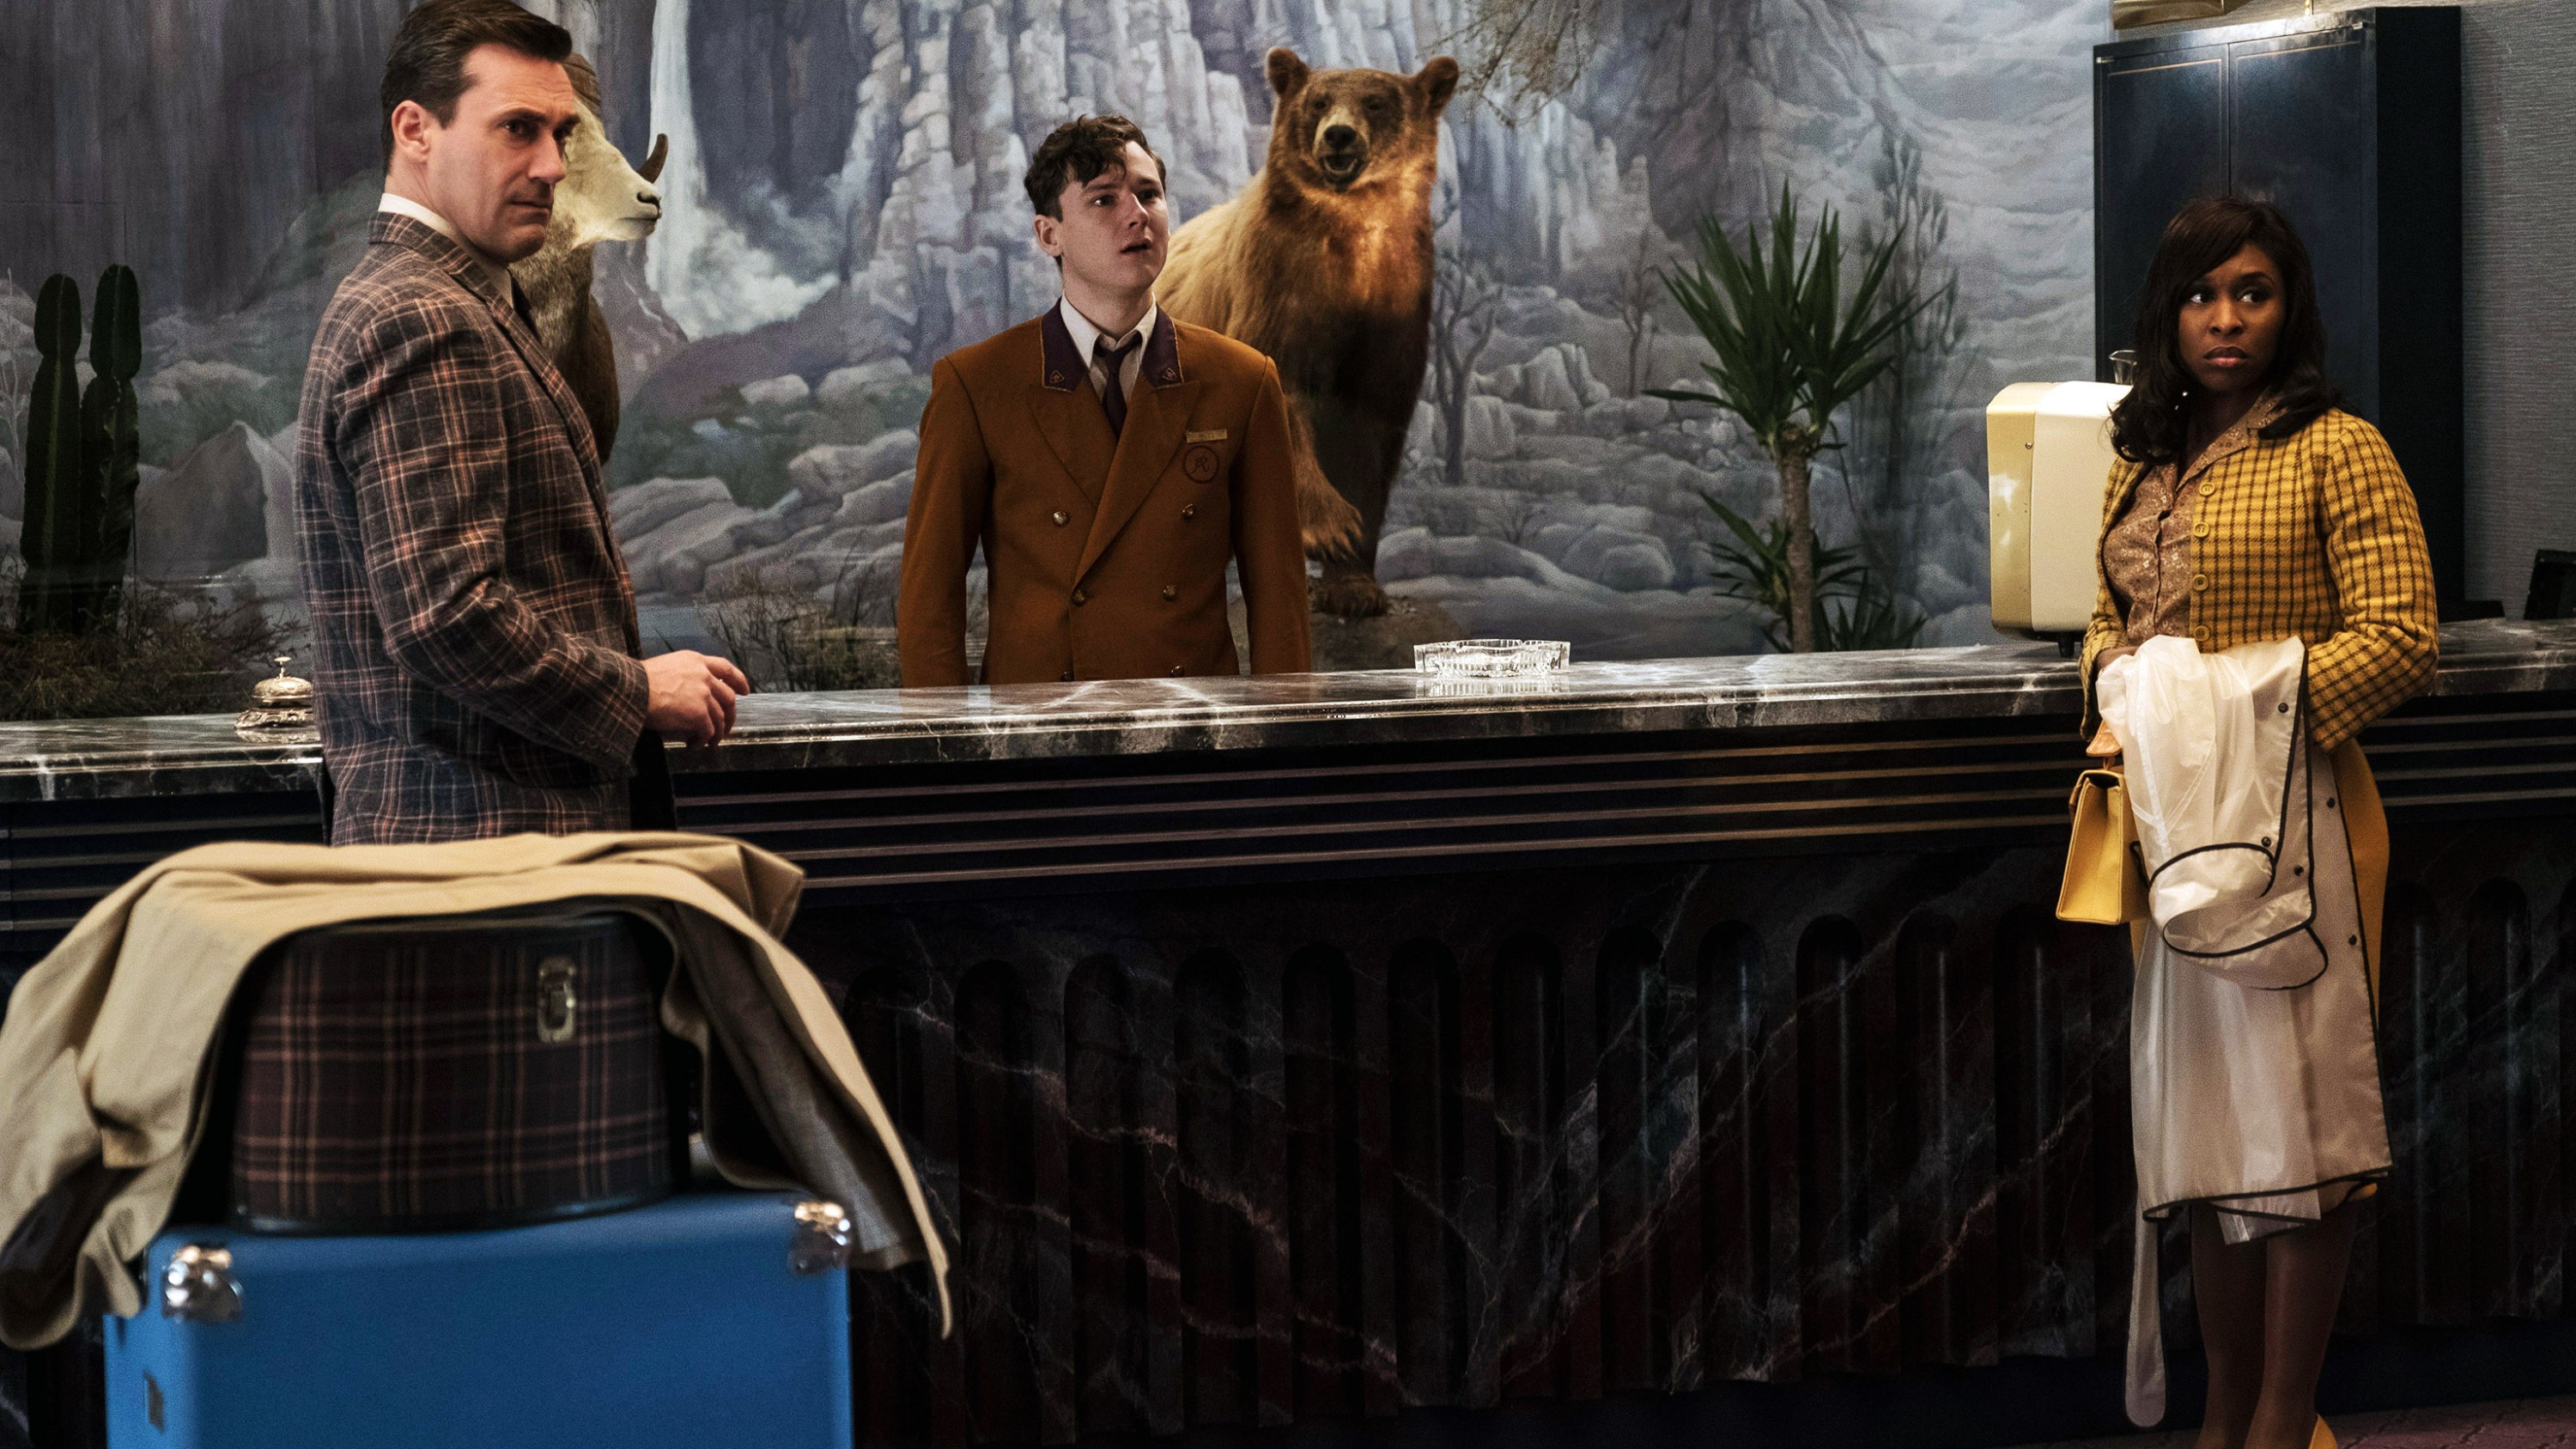 BAD TIMES AT THE EL ROYALE, l-r: Jon Hamm, Lewis Pullman, Cynthia Erivo, 2018. ph: Kimberley French/TM & copyright © Twentieth Century Fox Film Corp. All rights reserved. /Courtesy Everett Collection